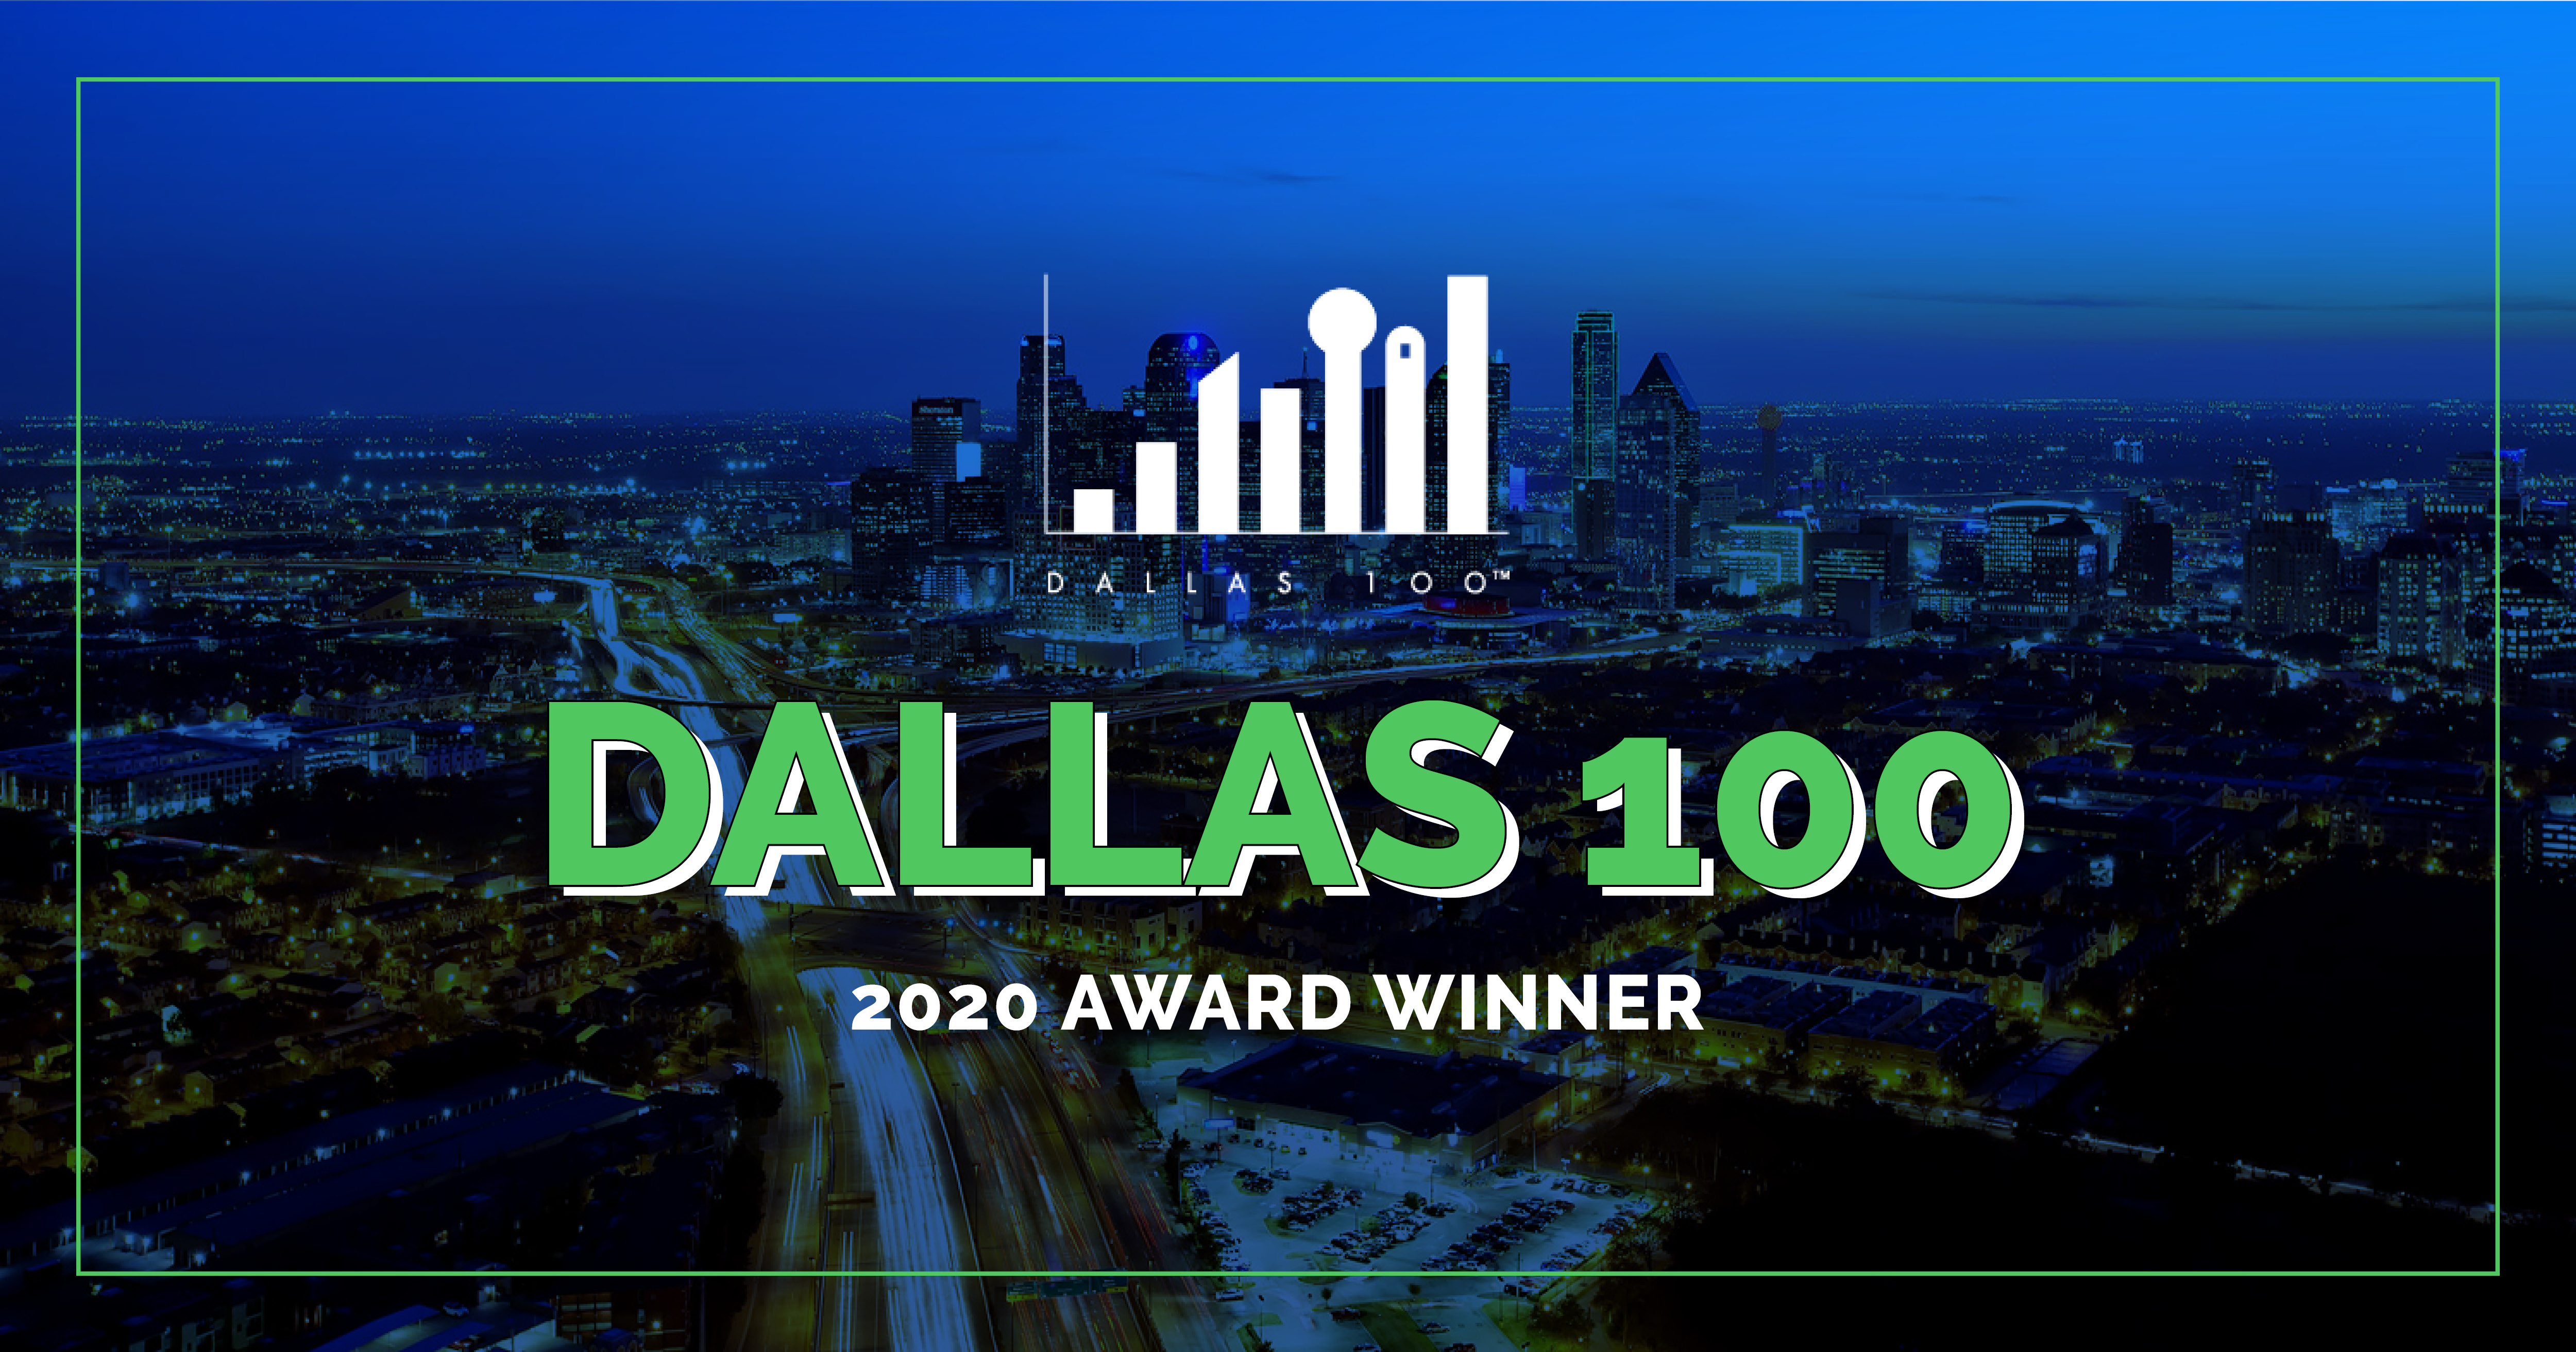 Signature Automation is recognized in the 2020 Dallas 100 Awards